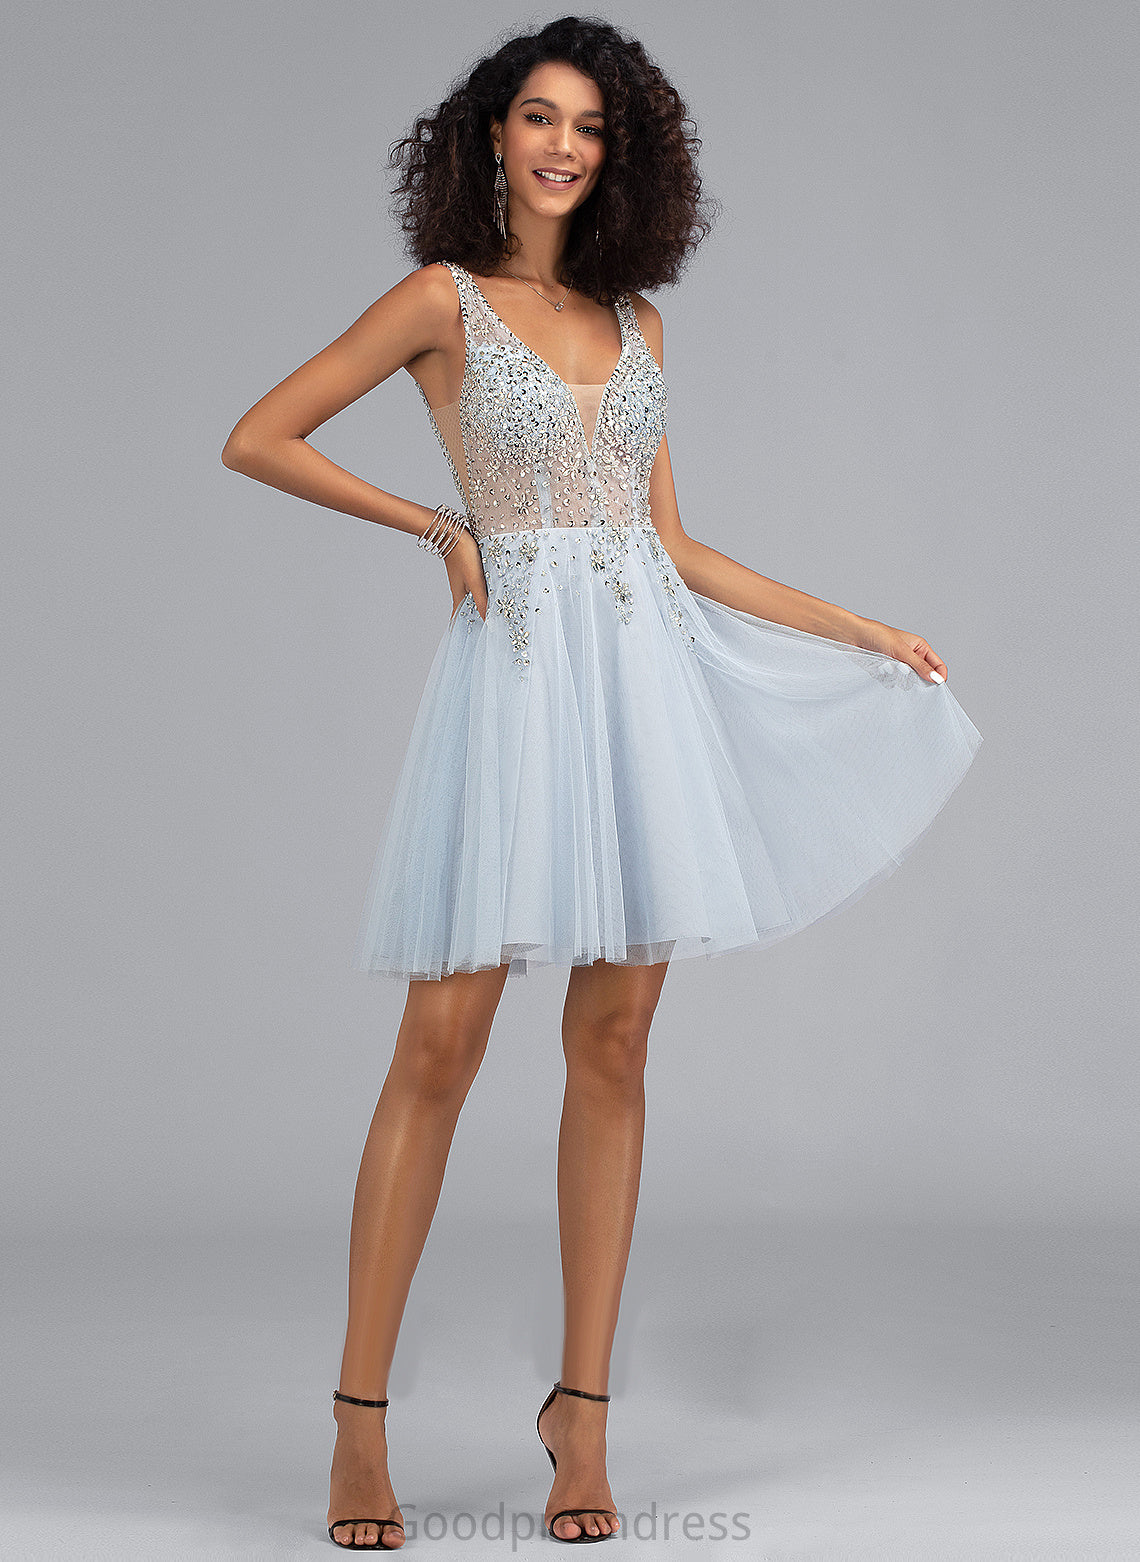 Beading Sequins With Tulle Dress A-Line Short/Mini Homecoming Dresses Homecoming Allisson V-neck